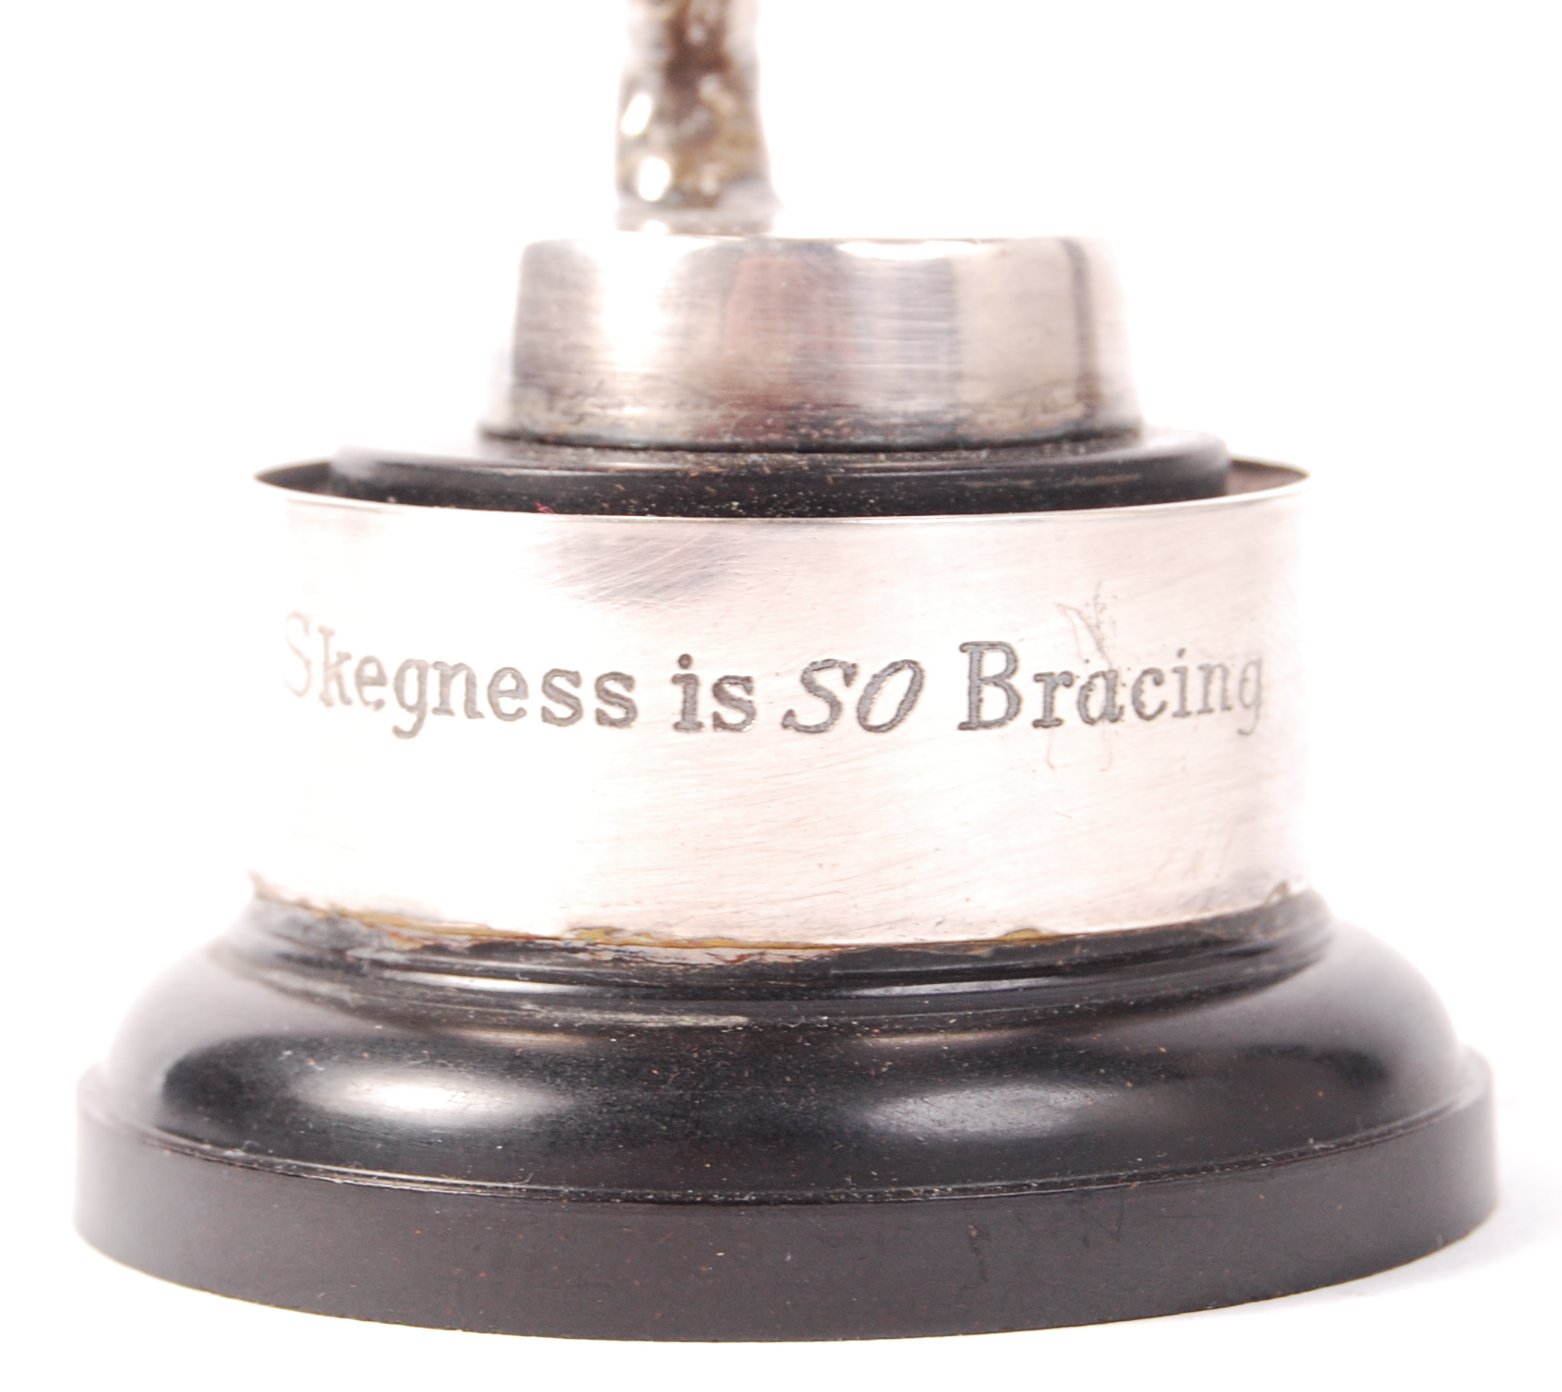 RARE JOHN HASSALL SILVER PLATED CAR MASCOT ' SKEGNESS IS SO BRACING ' - Image 3 of 3